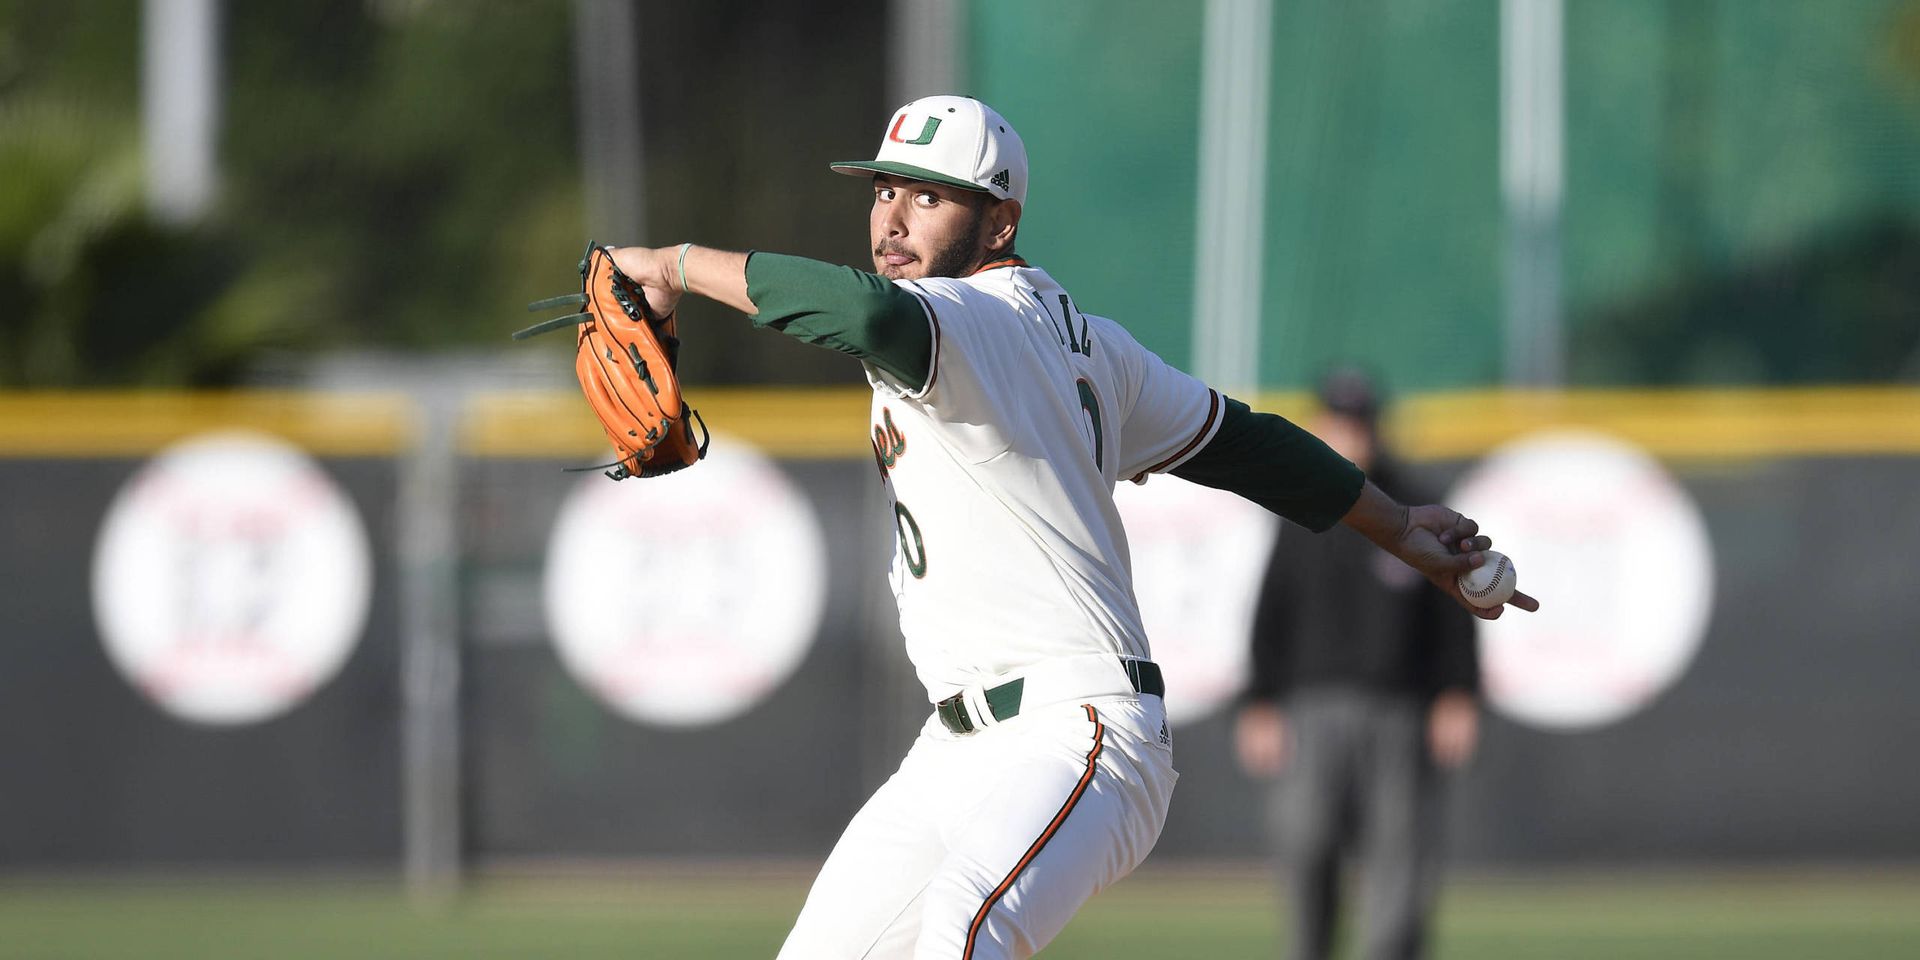 Miami Falls to No. 12 FGCU in Pitcher's Duel